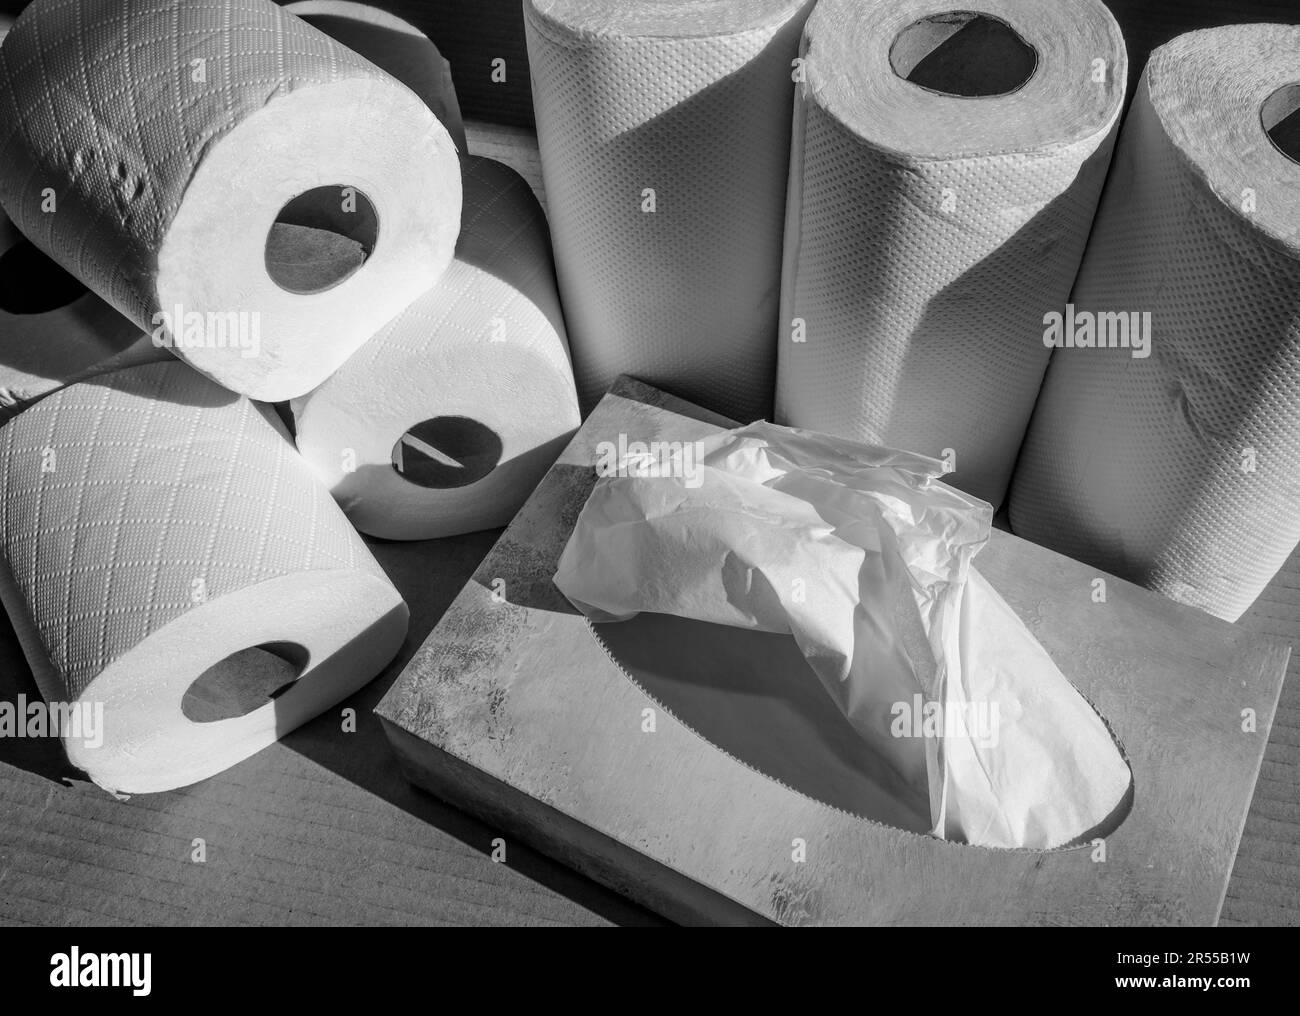 Monochrome image of Household paper products, toilet rolls, kitchen paper and tissues all white and non branded. Responsible pulp and paper operations Stock Photo